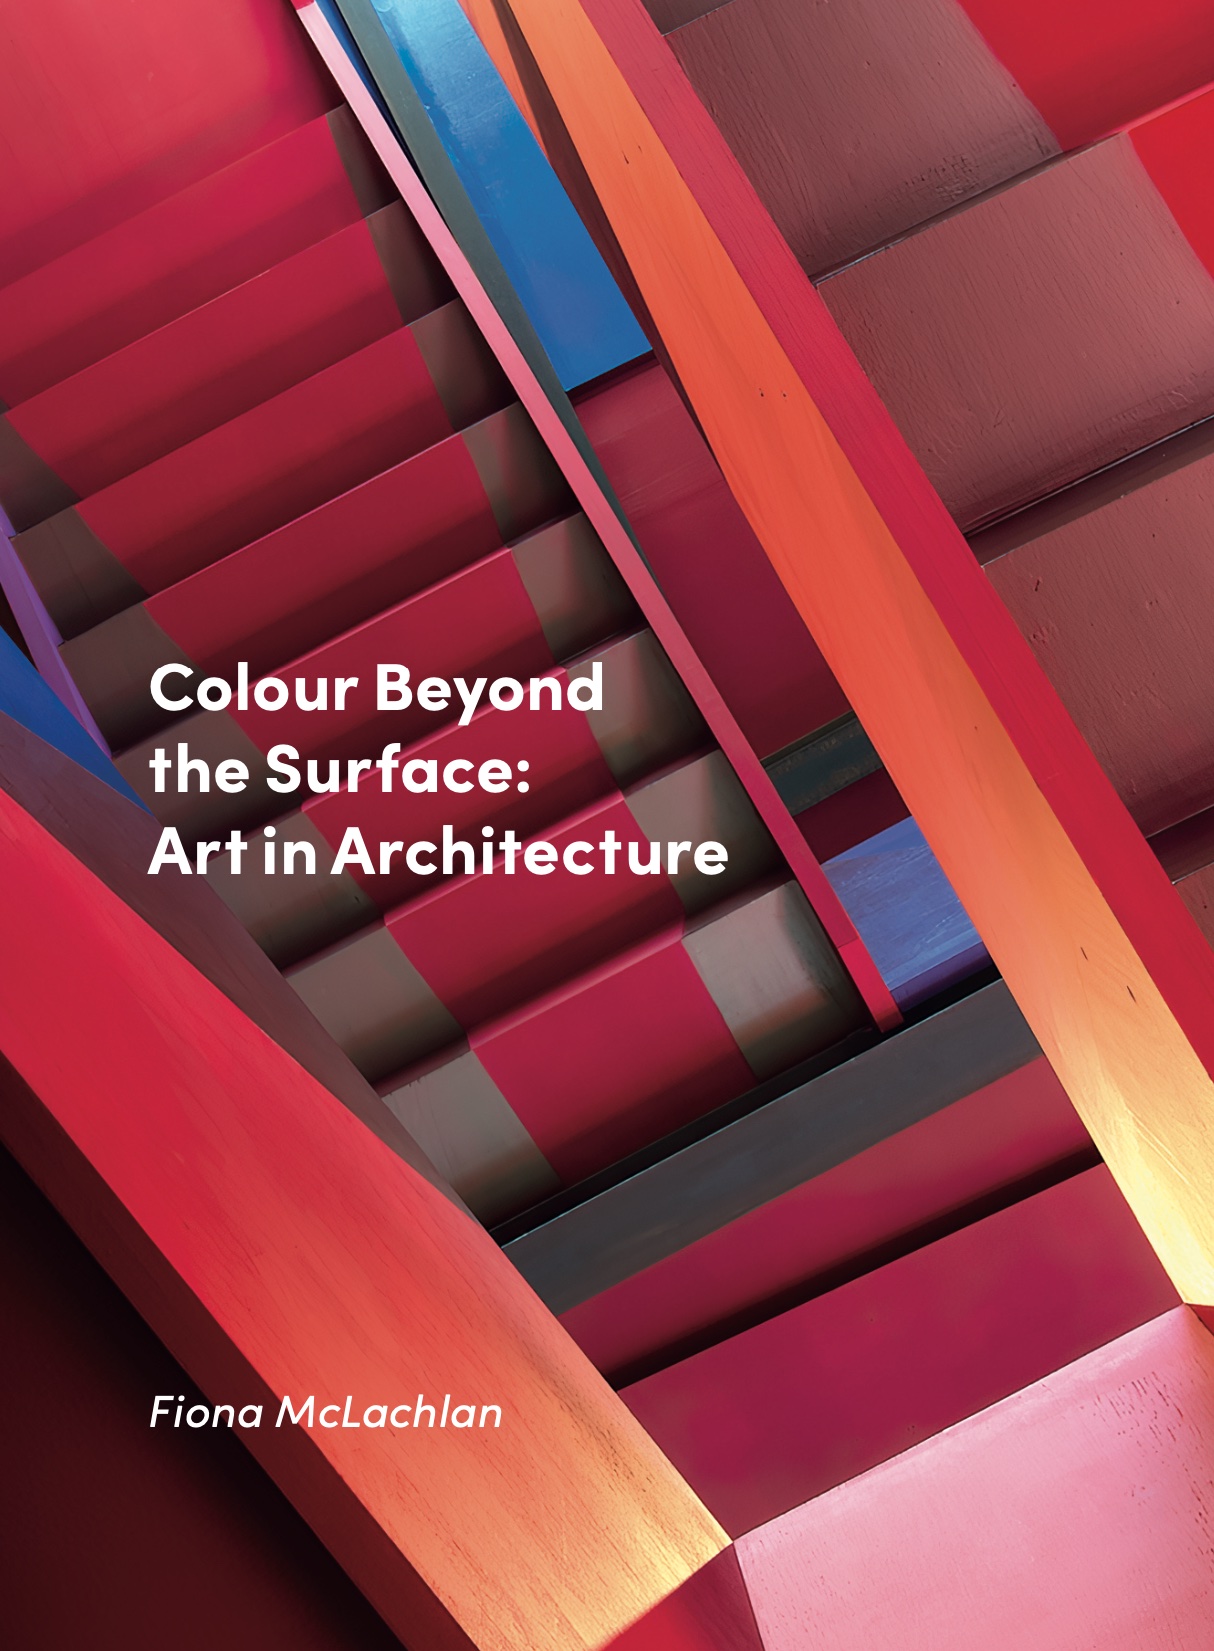 Fiona McLachlan: Colour Beyond the Surface: Art in Architecture